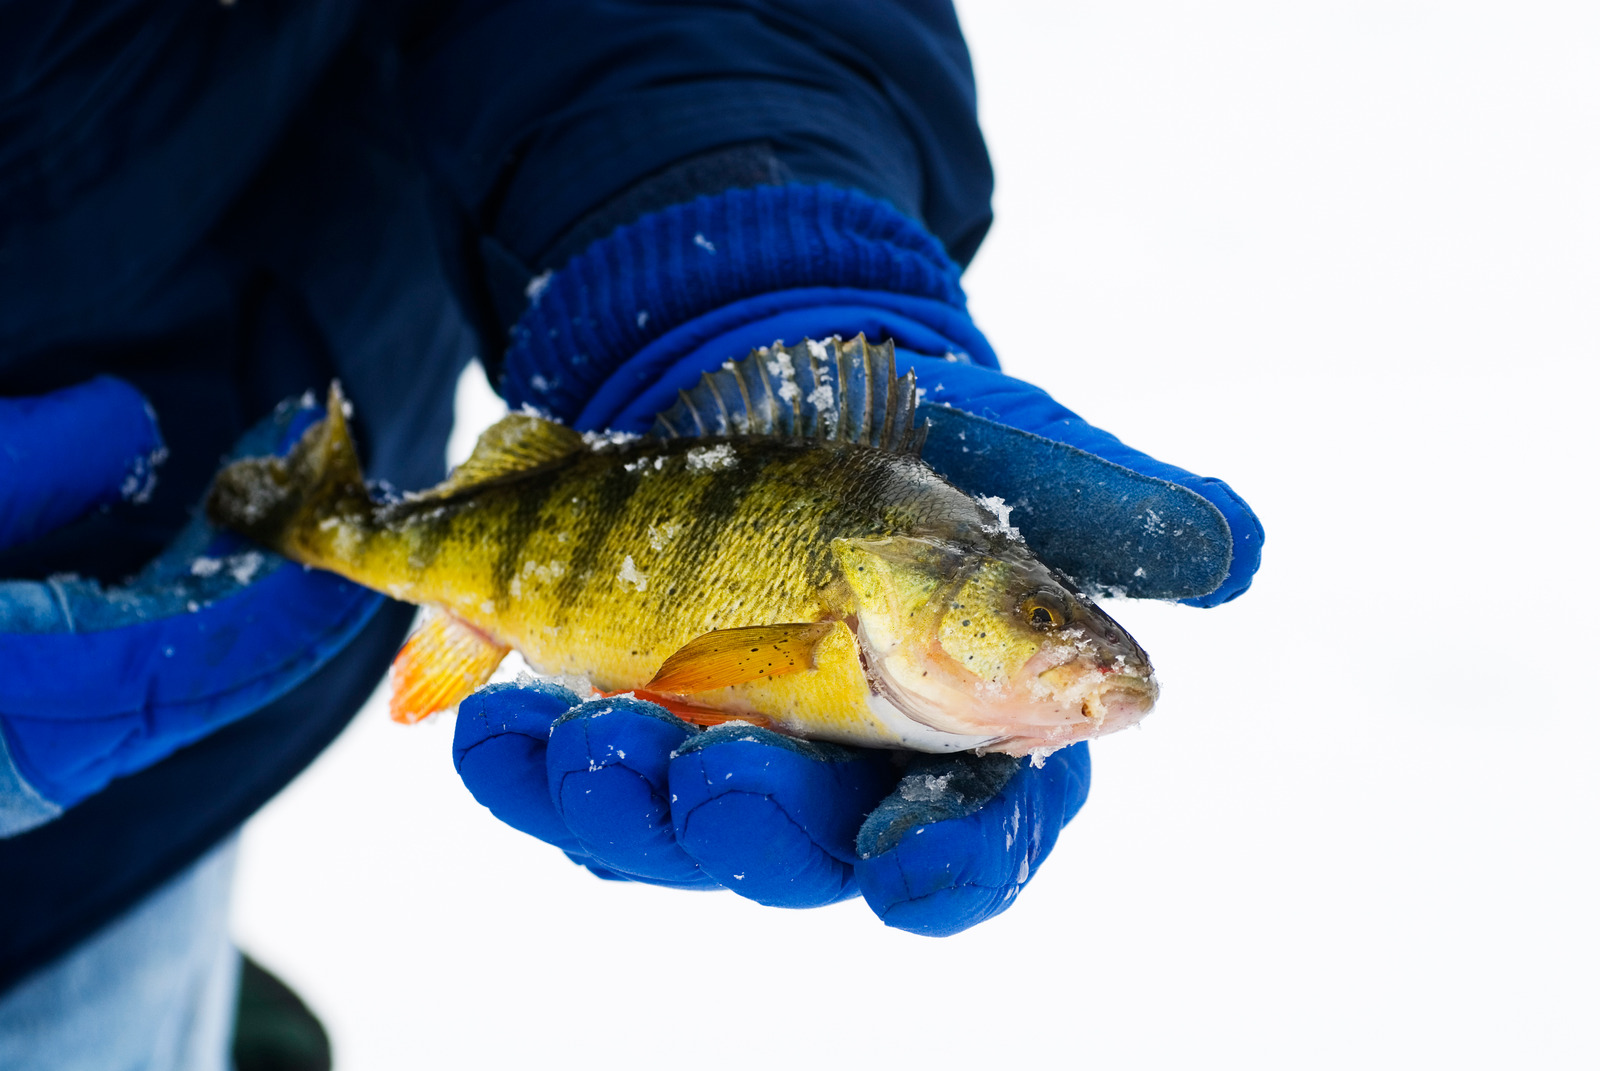 Gloved hands are holding a perch just caught while ice fishing on a Michigan pond.